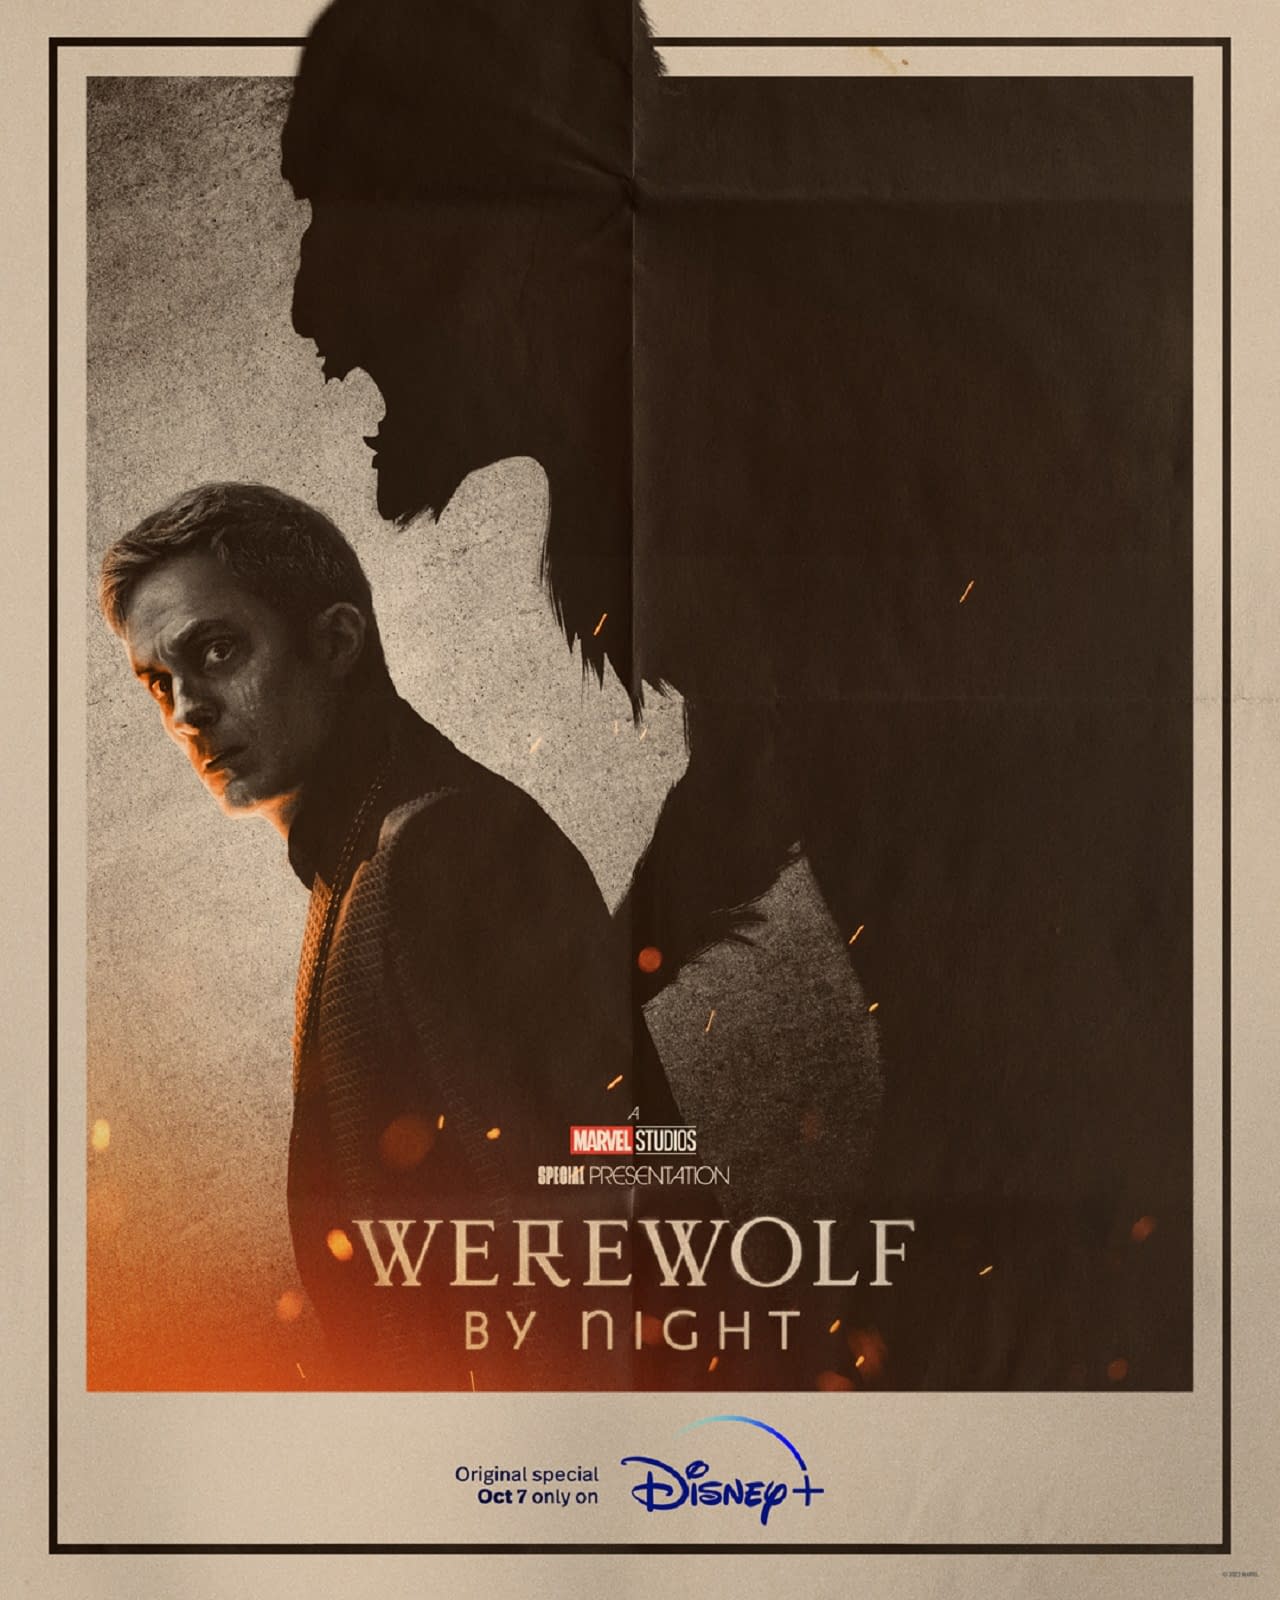 Marvel Goes To The Dark Side With 'Werewolf by Night' Trailer - mxdwn  Television